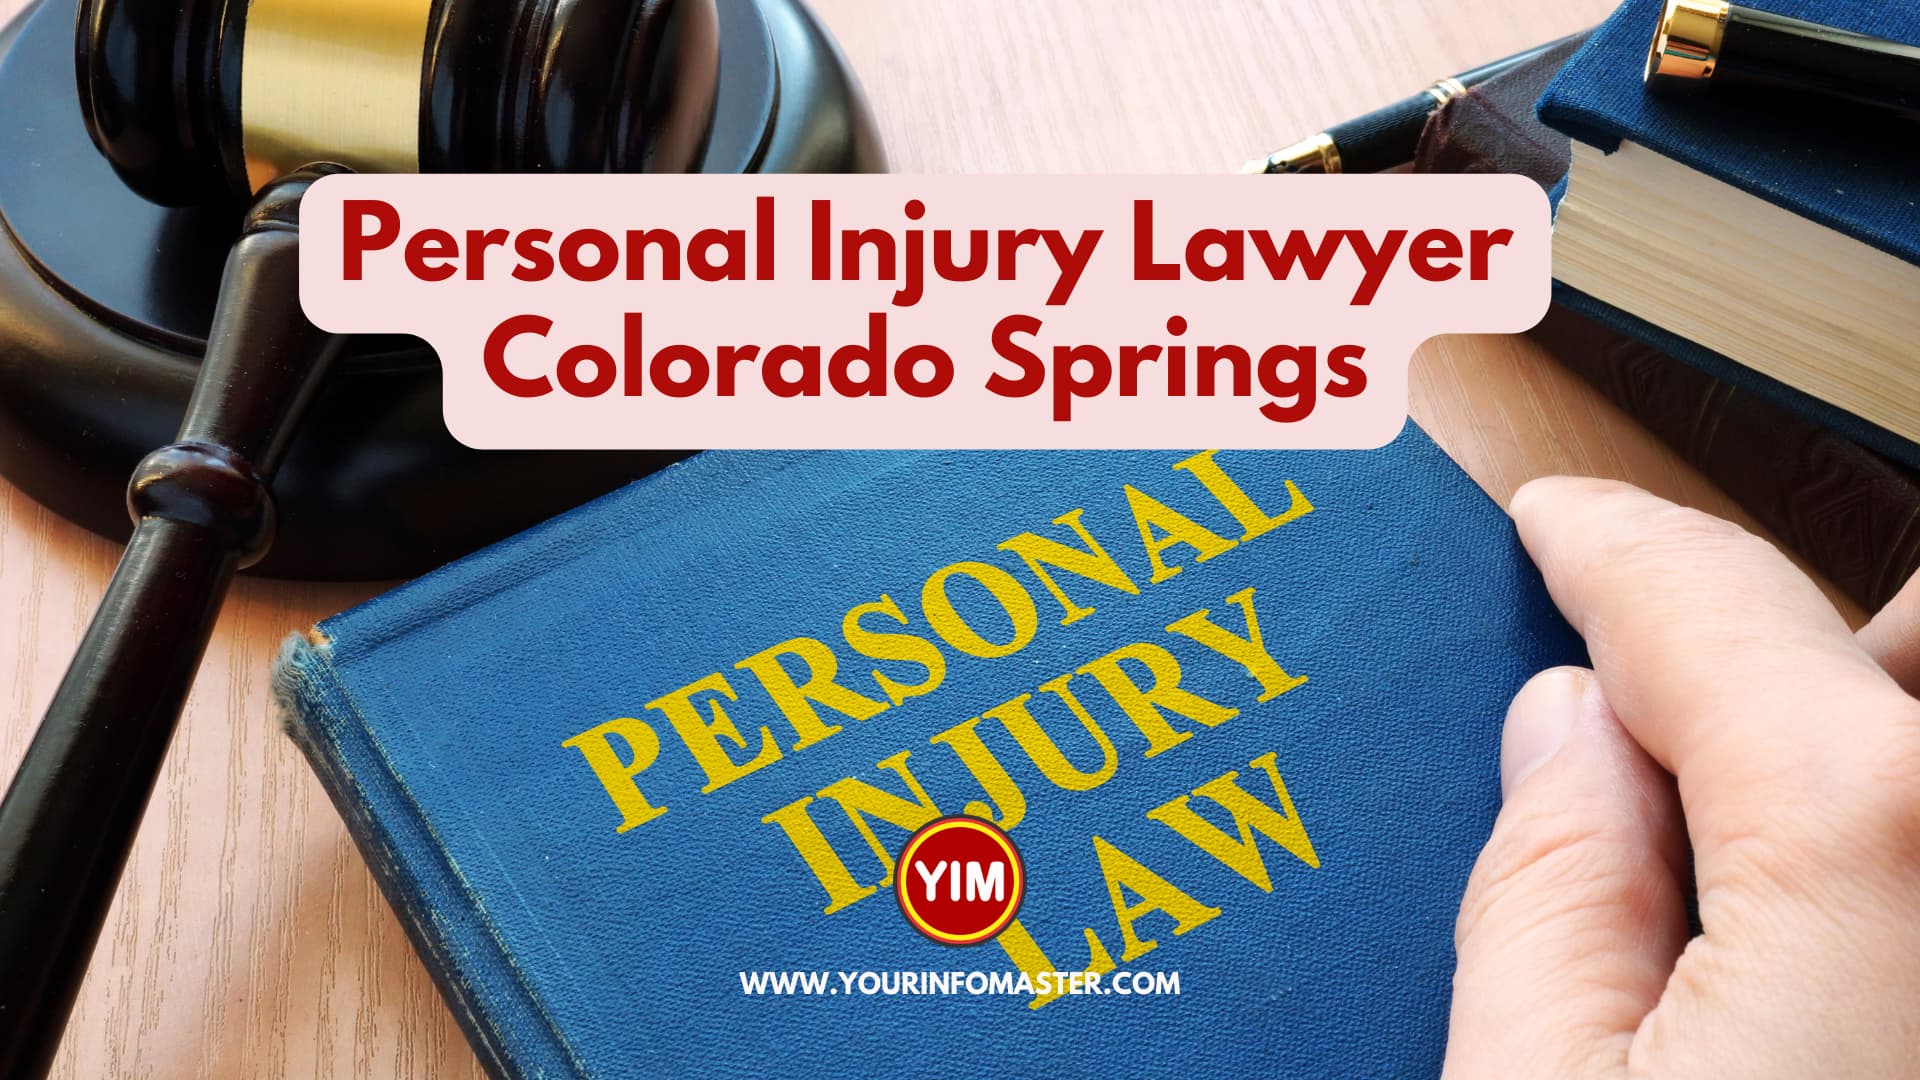 How to Hire the Best Personal Injury Lawyer Colorado Springs